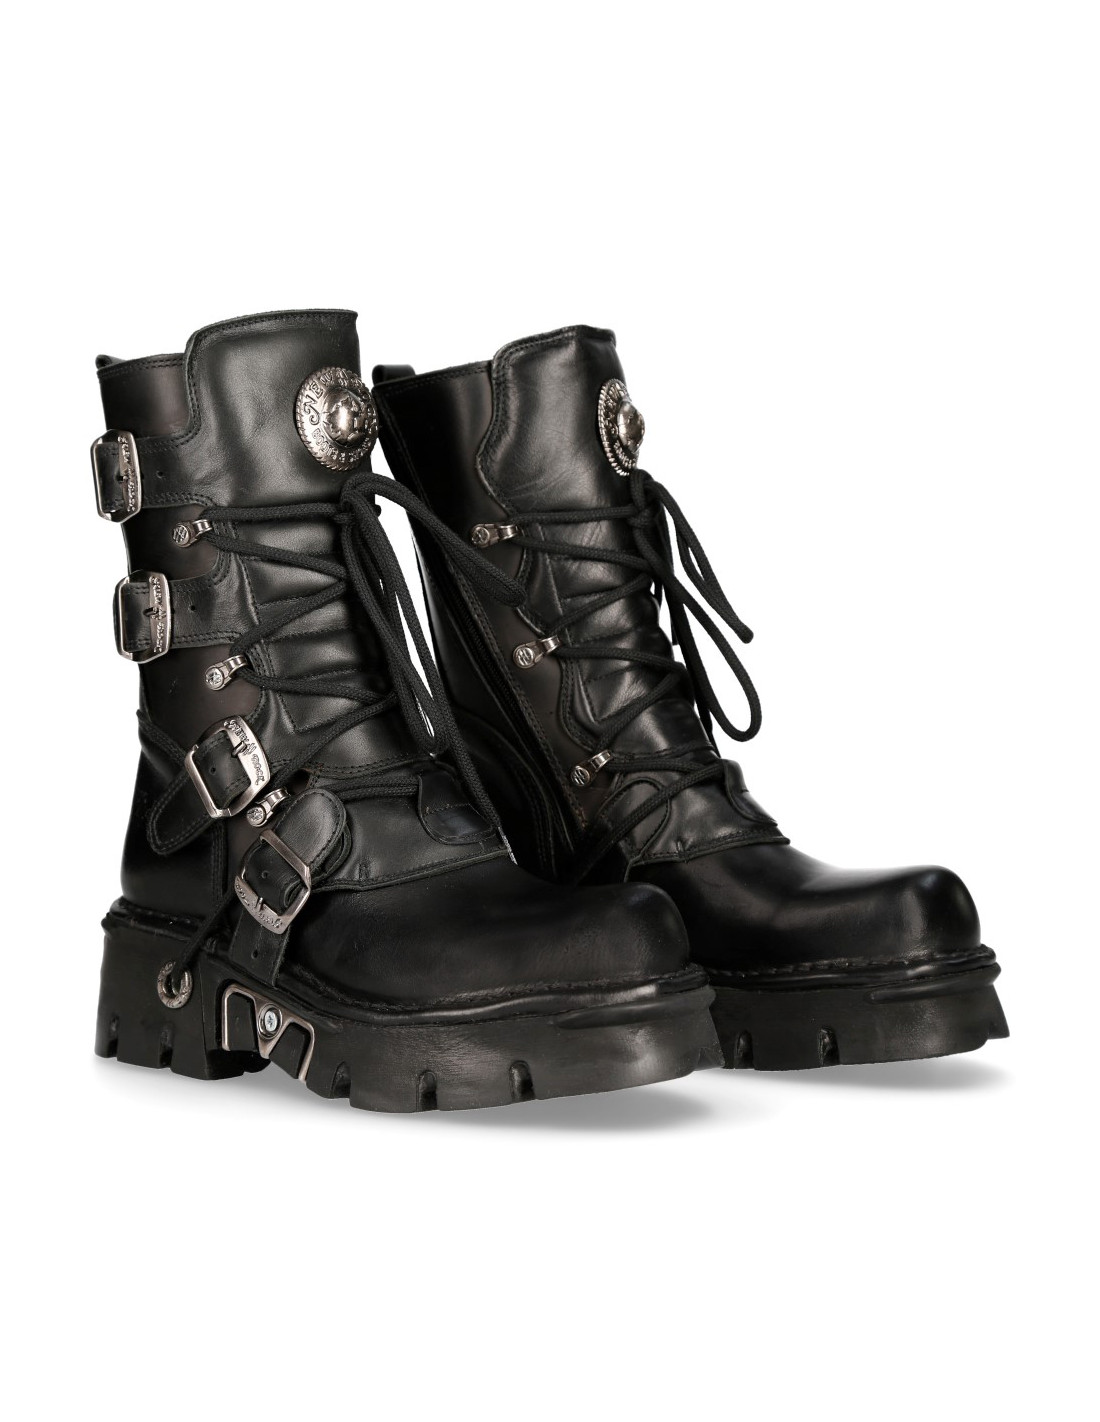 BOOT BLACK REACTOR WITH LACES M-373-S29